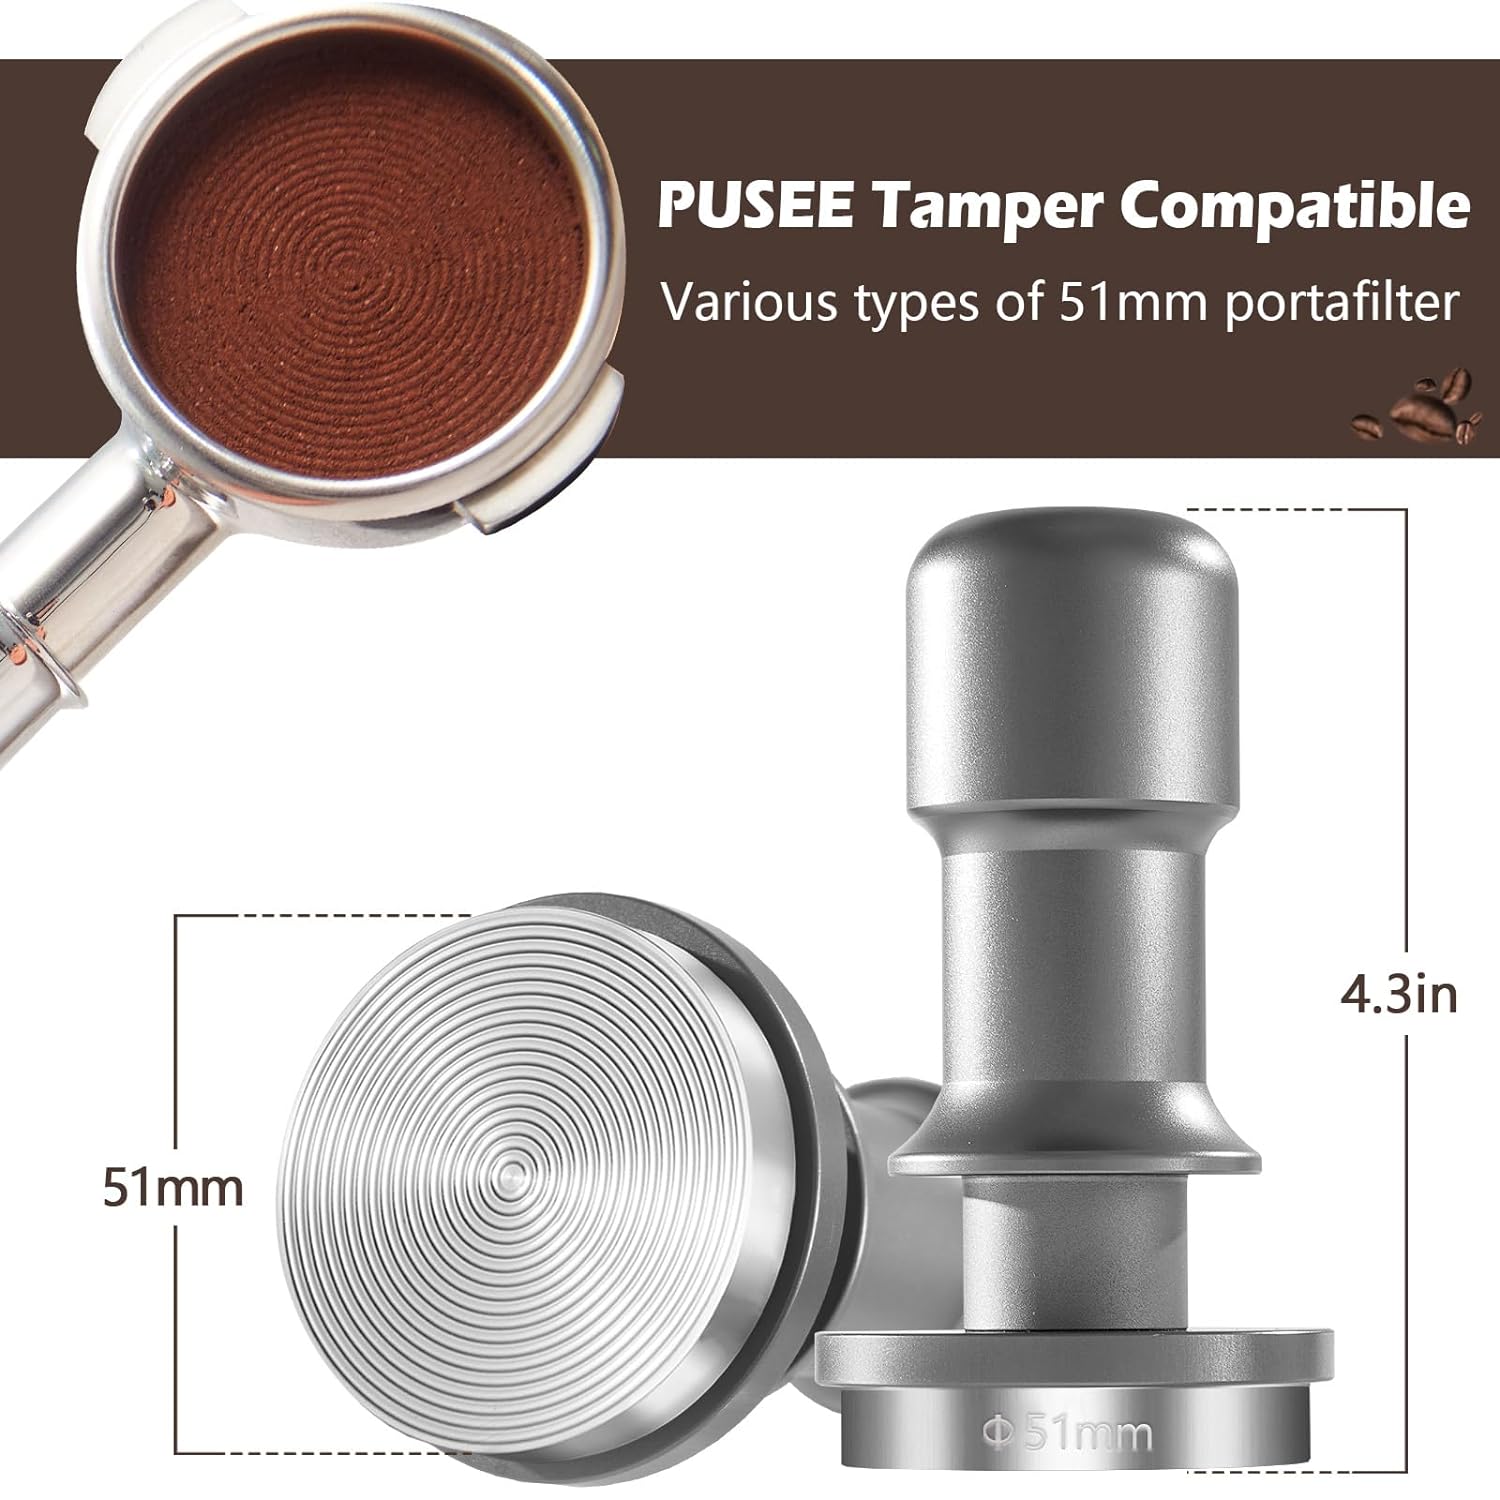 PUSEE 51mm Espresso Coffee Tamper,Premium 30lb Calibrated Espresso Tamper Upgrade Coffee Tamper with Spring Loaded,100% Stainless Steel Ground Tamper for Barista Home Coffee Espresso Accessories